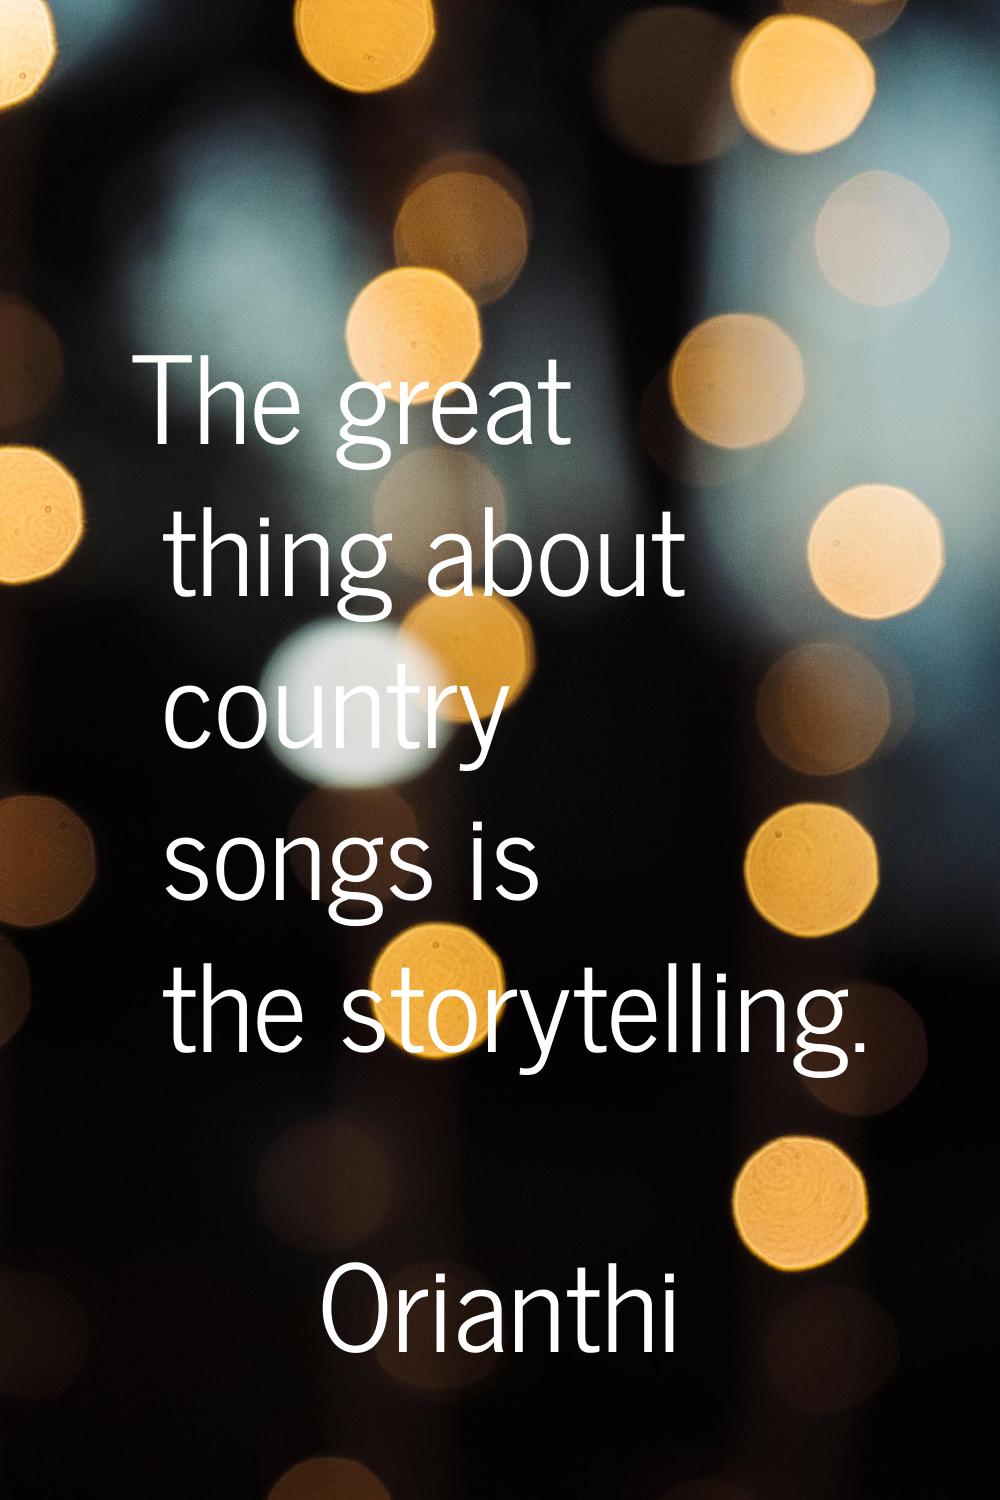 The great thing about country songs is the storytelling.